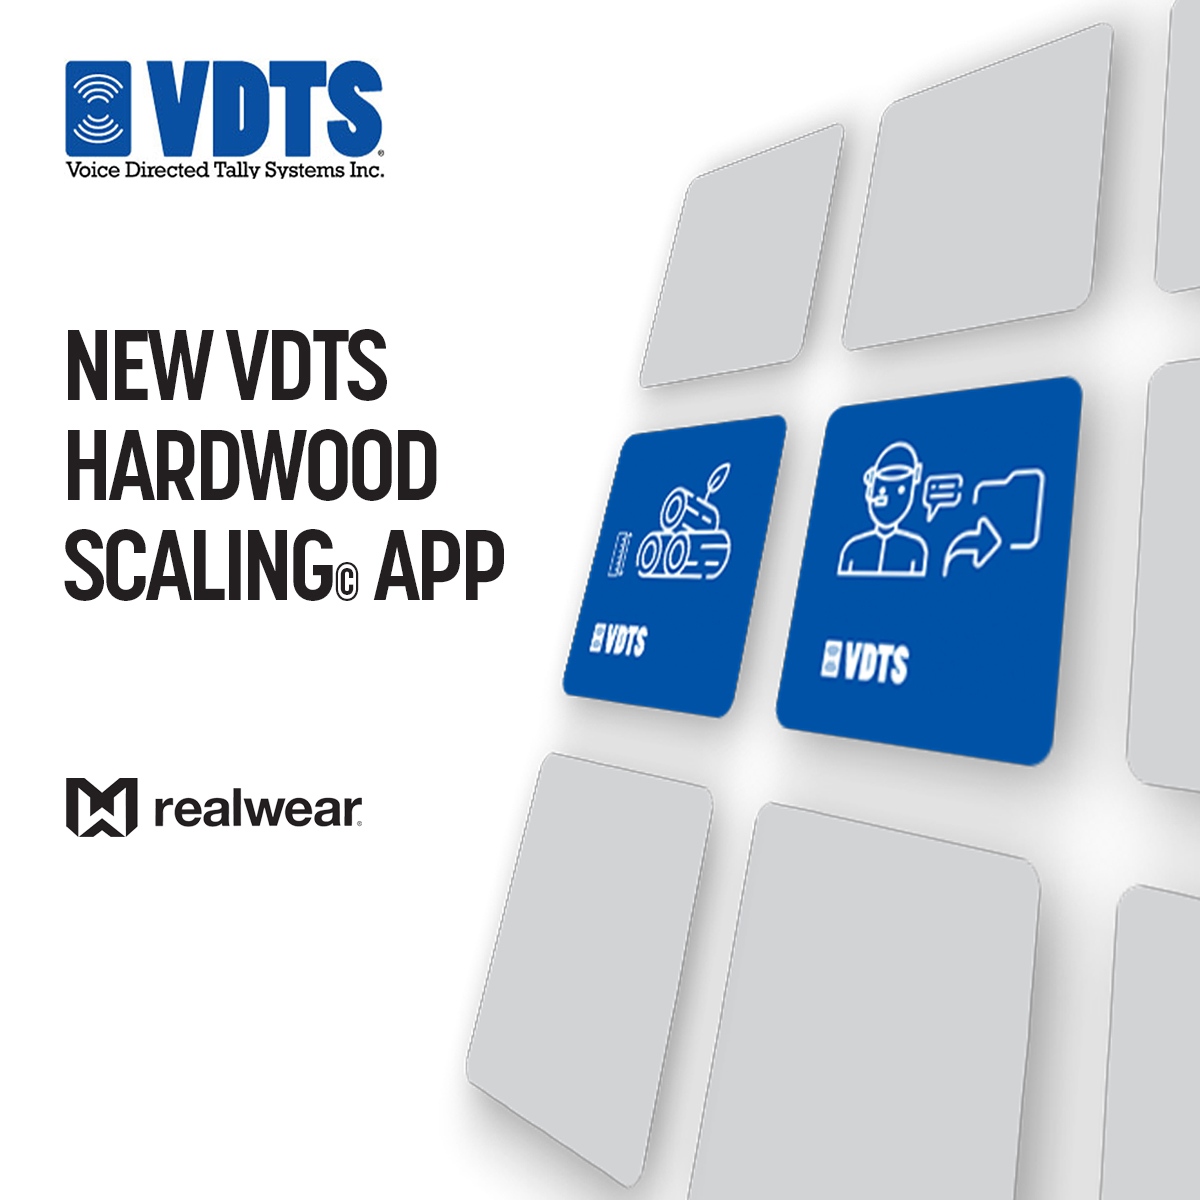 The VDTS Hardwood Scaling© app is now on the exciting RealWear© Marketplace. Software solutions to unlock the power of your device. imsend.me/scalingapp-rw #appmarketplace #apps #hardwoodscaling #datacollection #handsfree #wearabletechnology #remoteworker